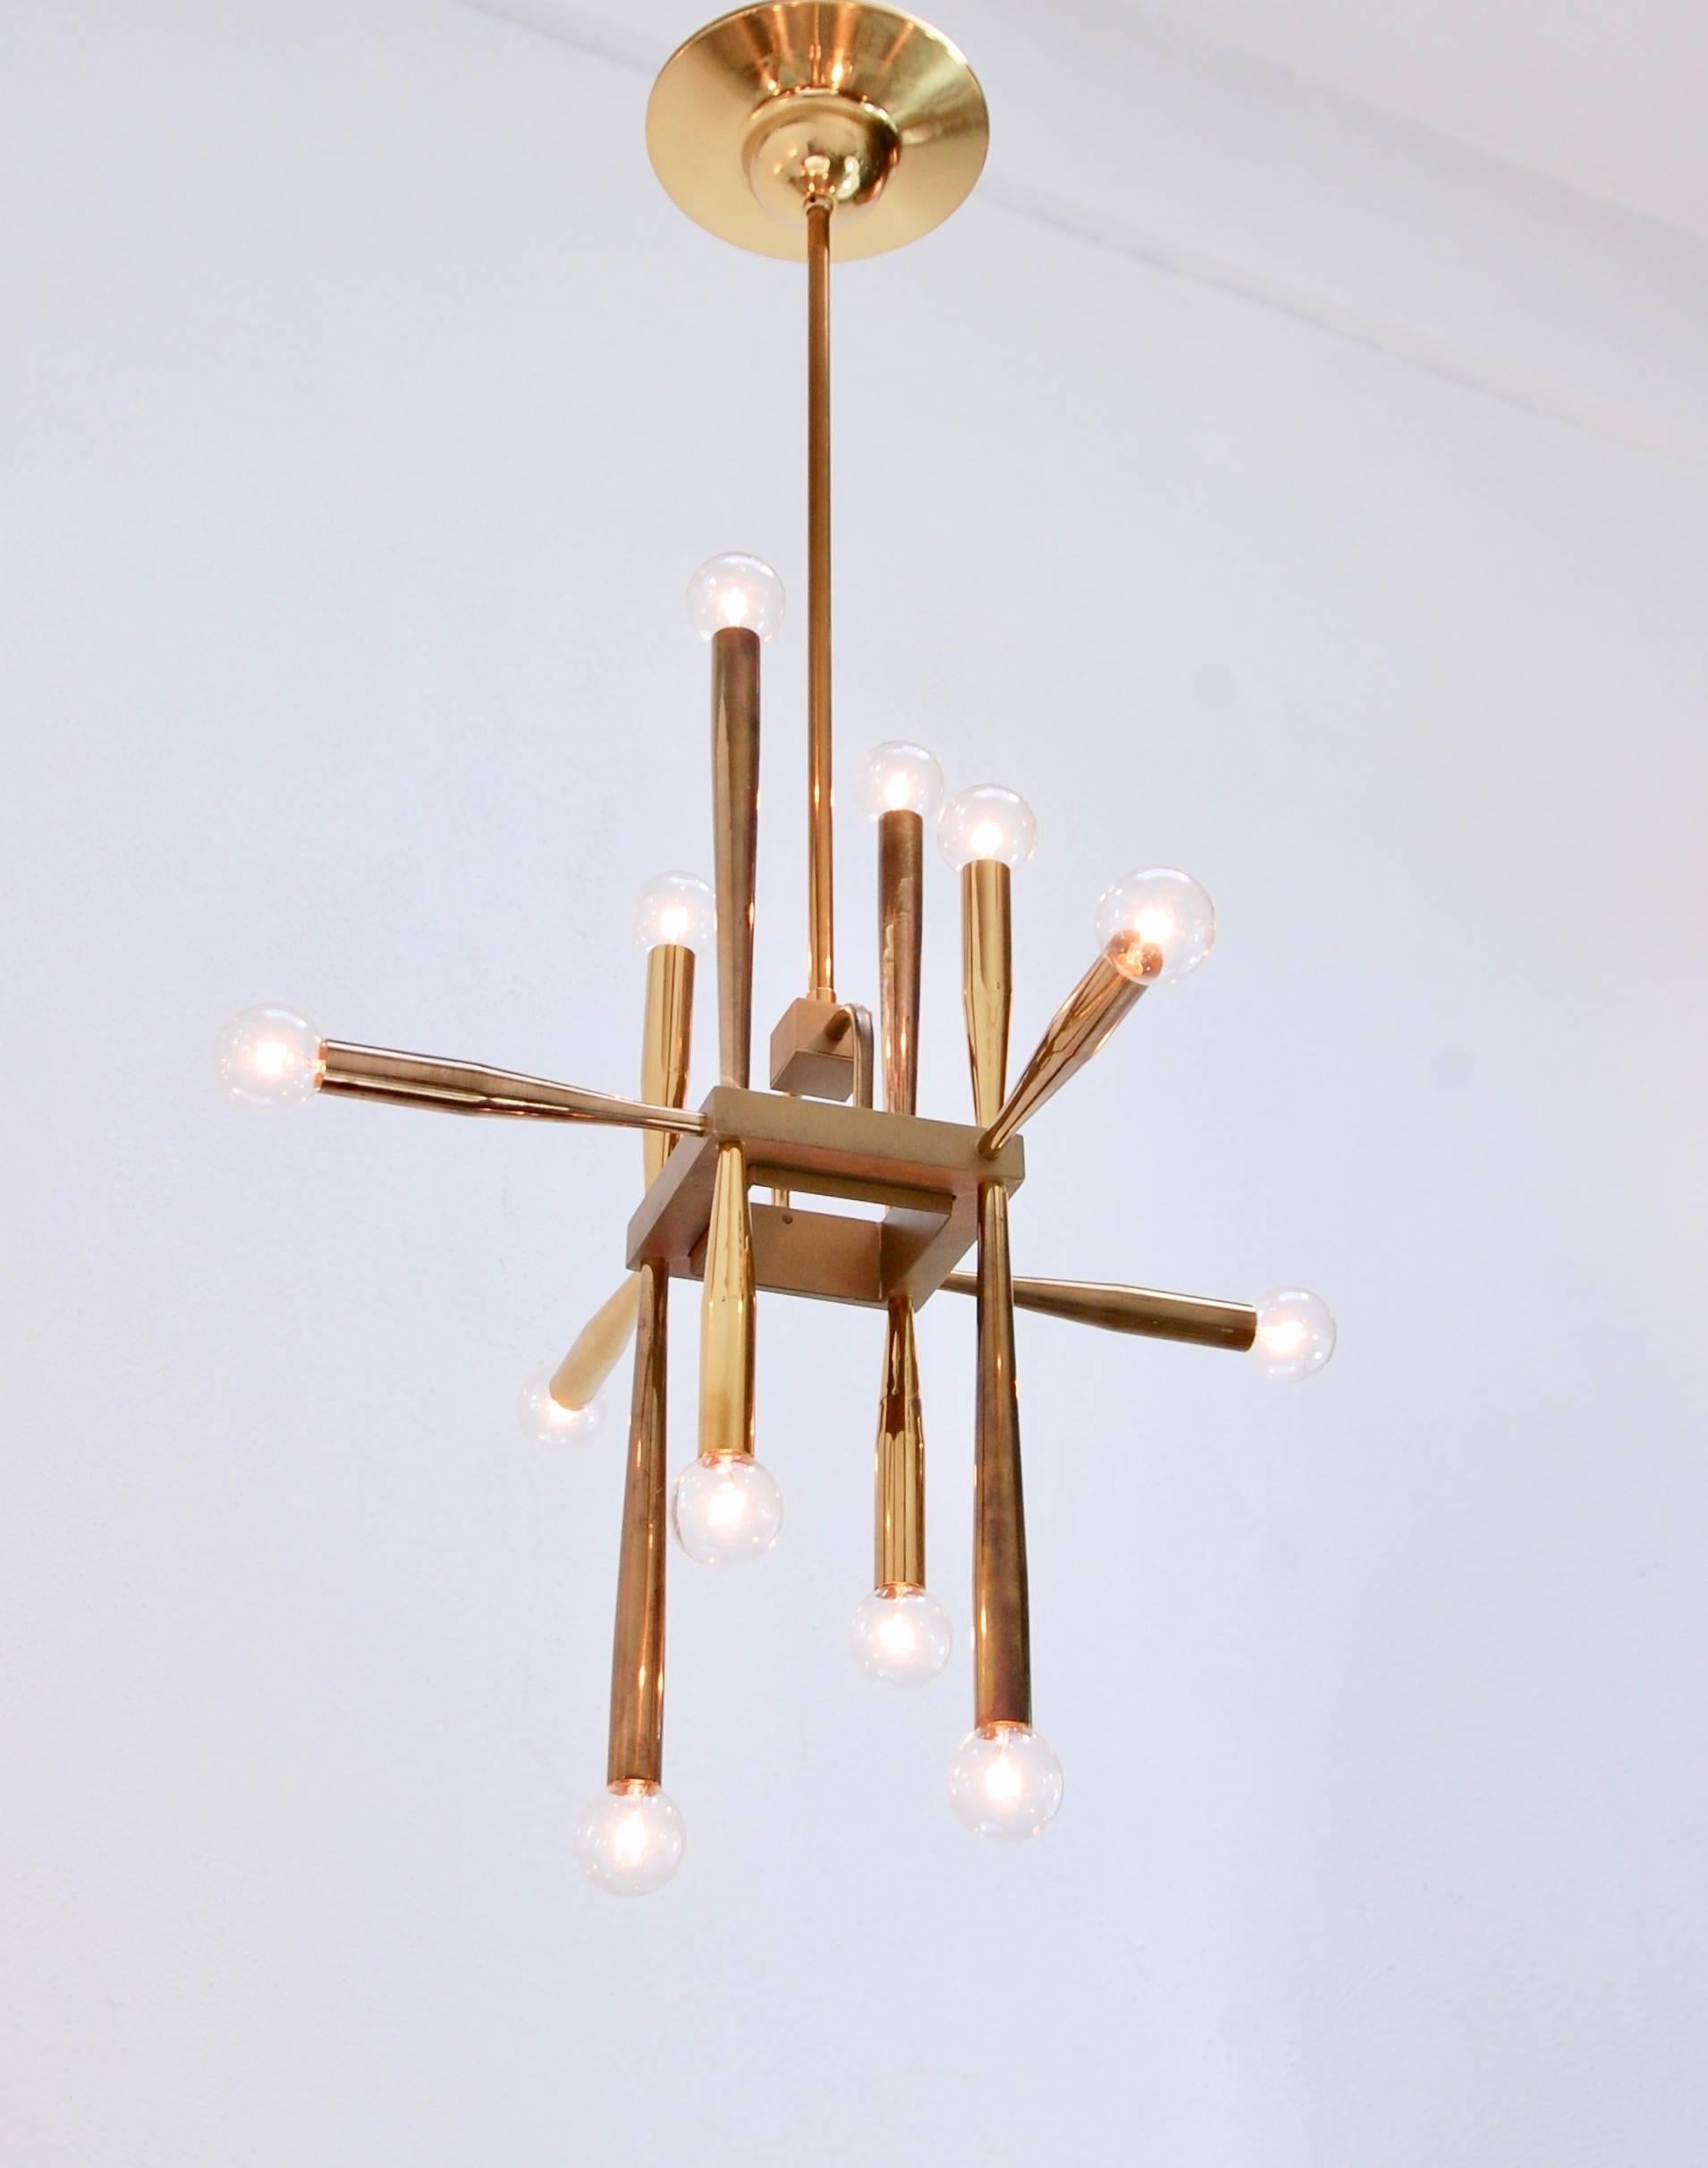 Of the period 12 light cubic Mid-Century Modern chandelier from Italy. Partially restored, original patinated brass finish, 12 individual E12 candelabra based sockets per arm, wired for the US. Overall drop adjustable upon request. Measures: Overall